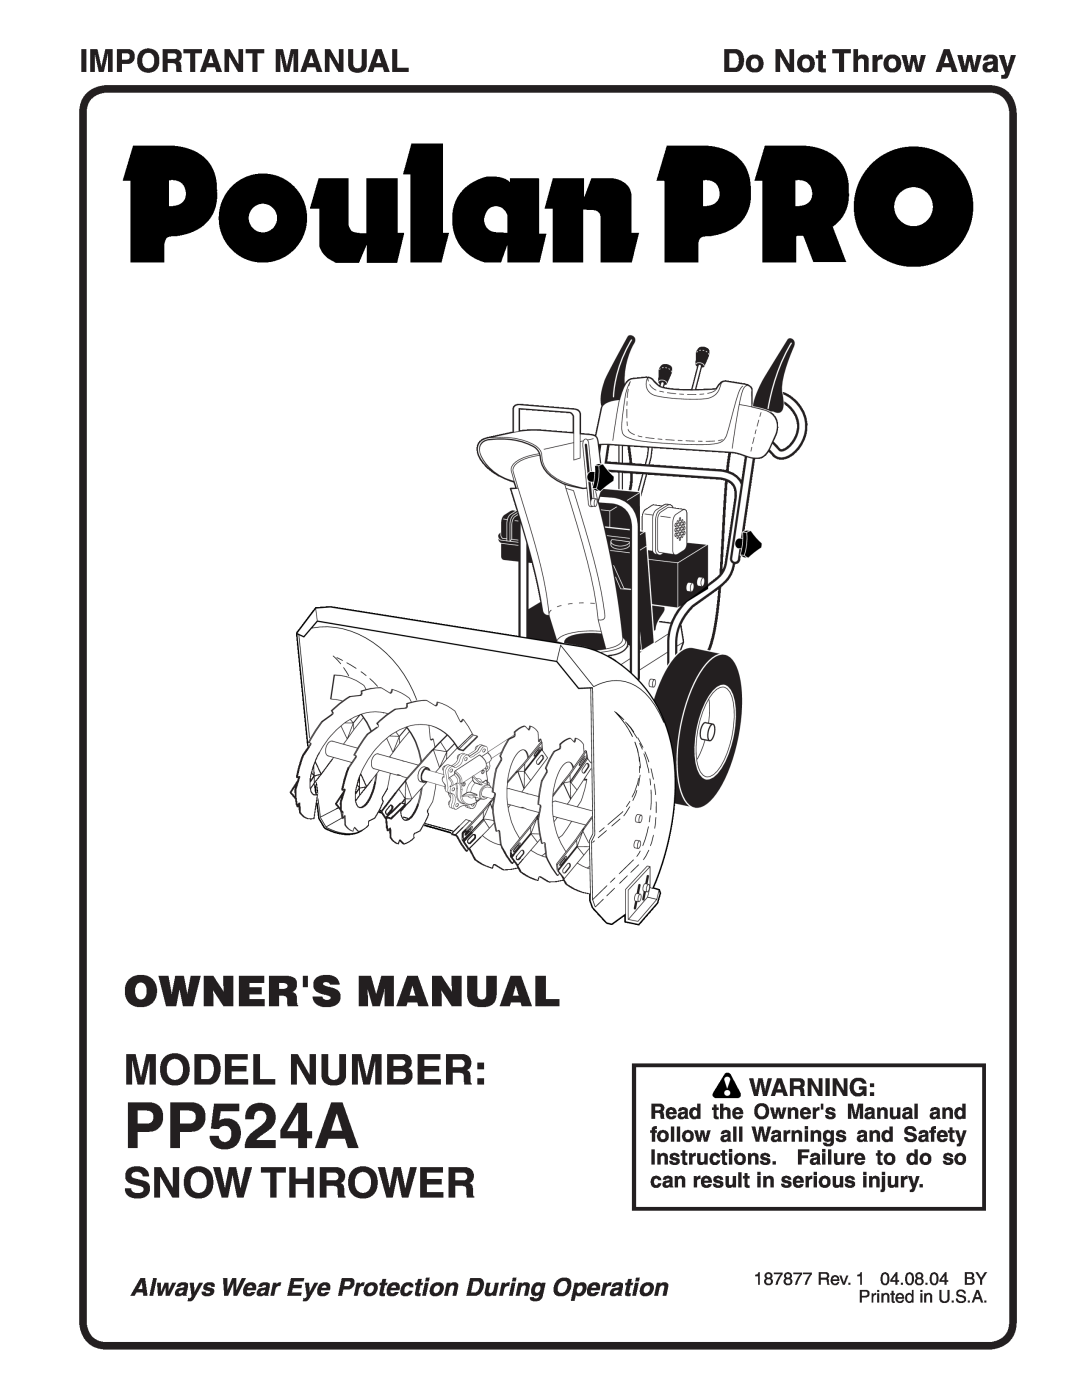 Poulan PP524A owner manual Snow Thrower, Important Manual, Do Not Throw Away, Always Wear Eye Protection During Operation 